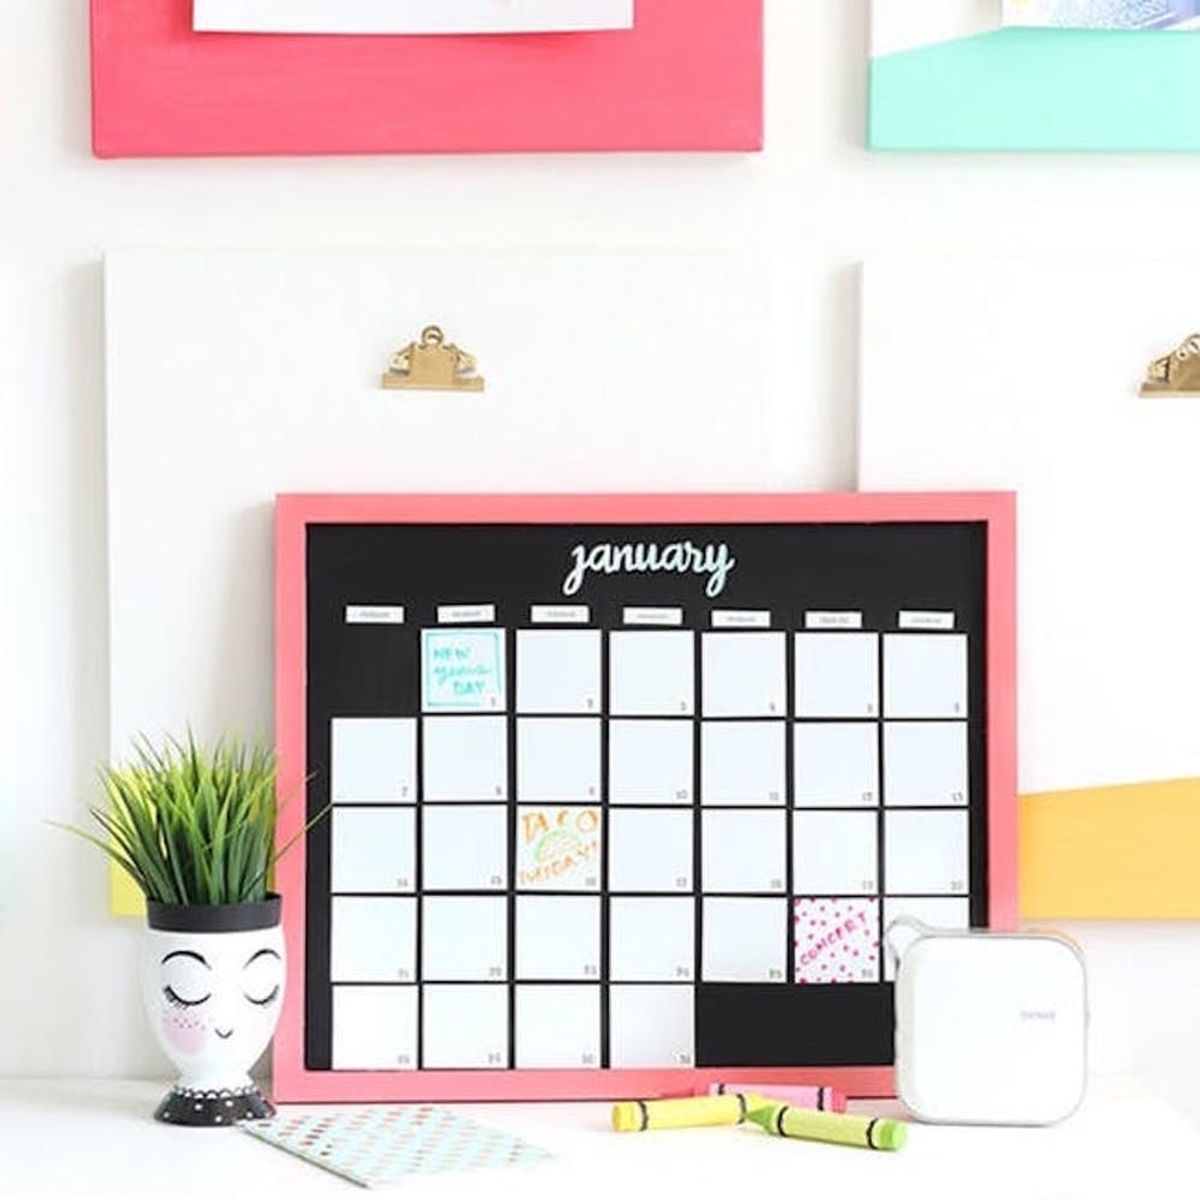 Whiteboard Calendars, Trays, and More Organization DIYs to Tackle in 2018